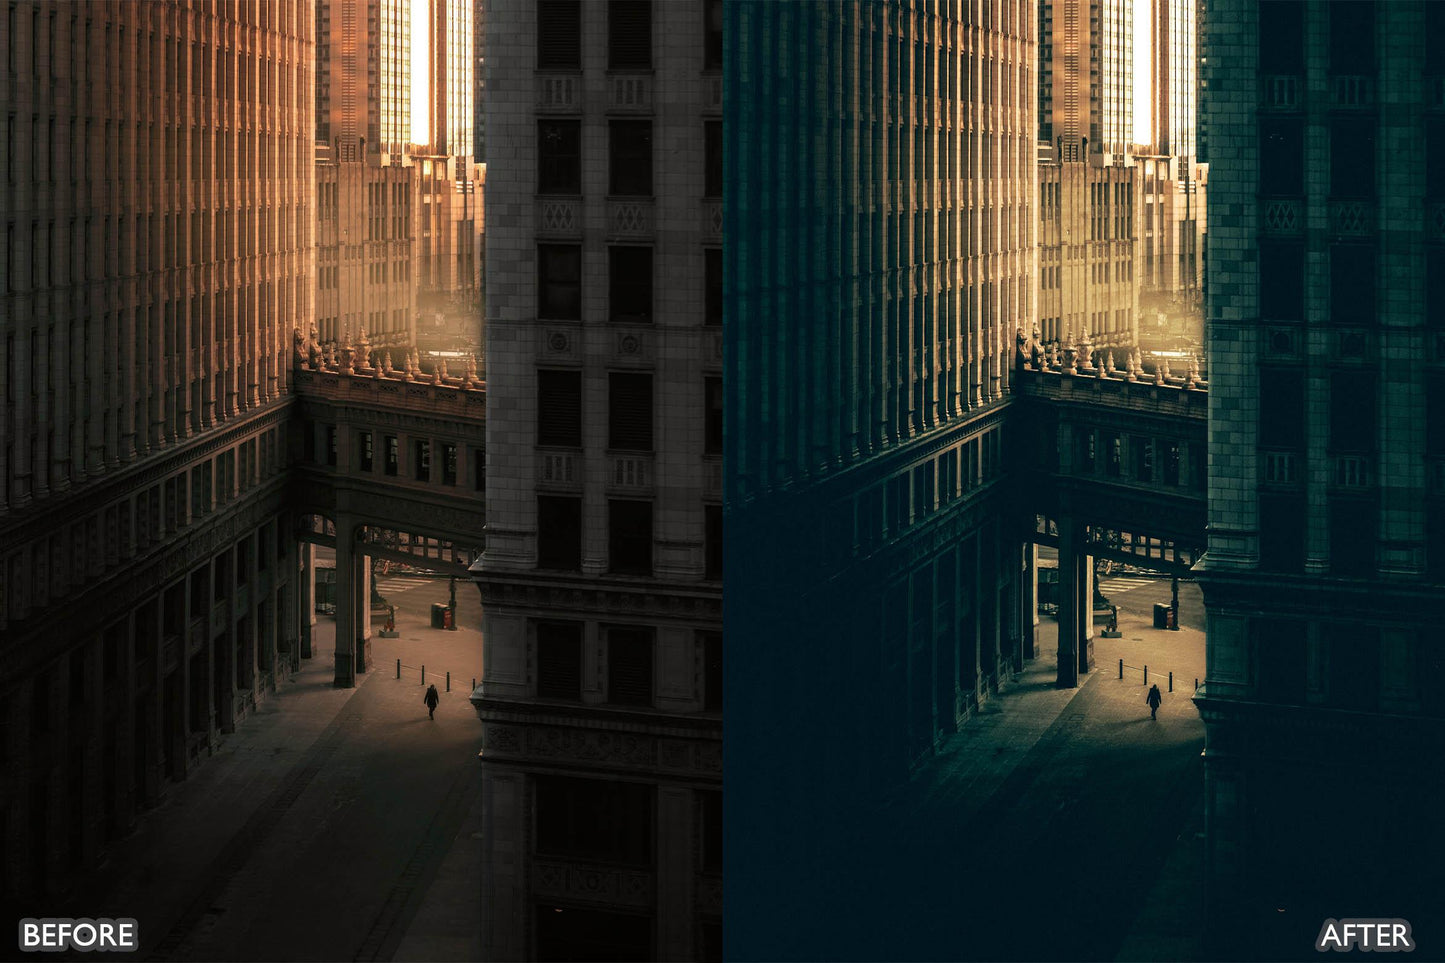 Urban Cinematic Lightroom Presets Pack - adobe lightroom presets, Blogger presets, Cinematic Presets, instagram presets, landscape presets, lightroom presets, moody presets, nude tone presets, Portrait presets, presets before and after, professional lightroom presets, urban presets - aaapresets.com